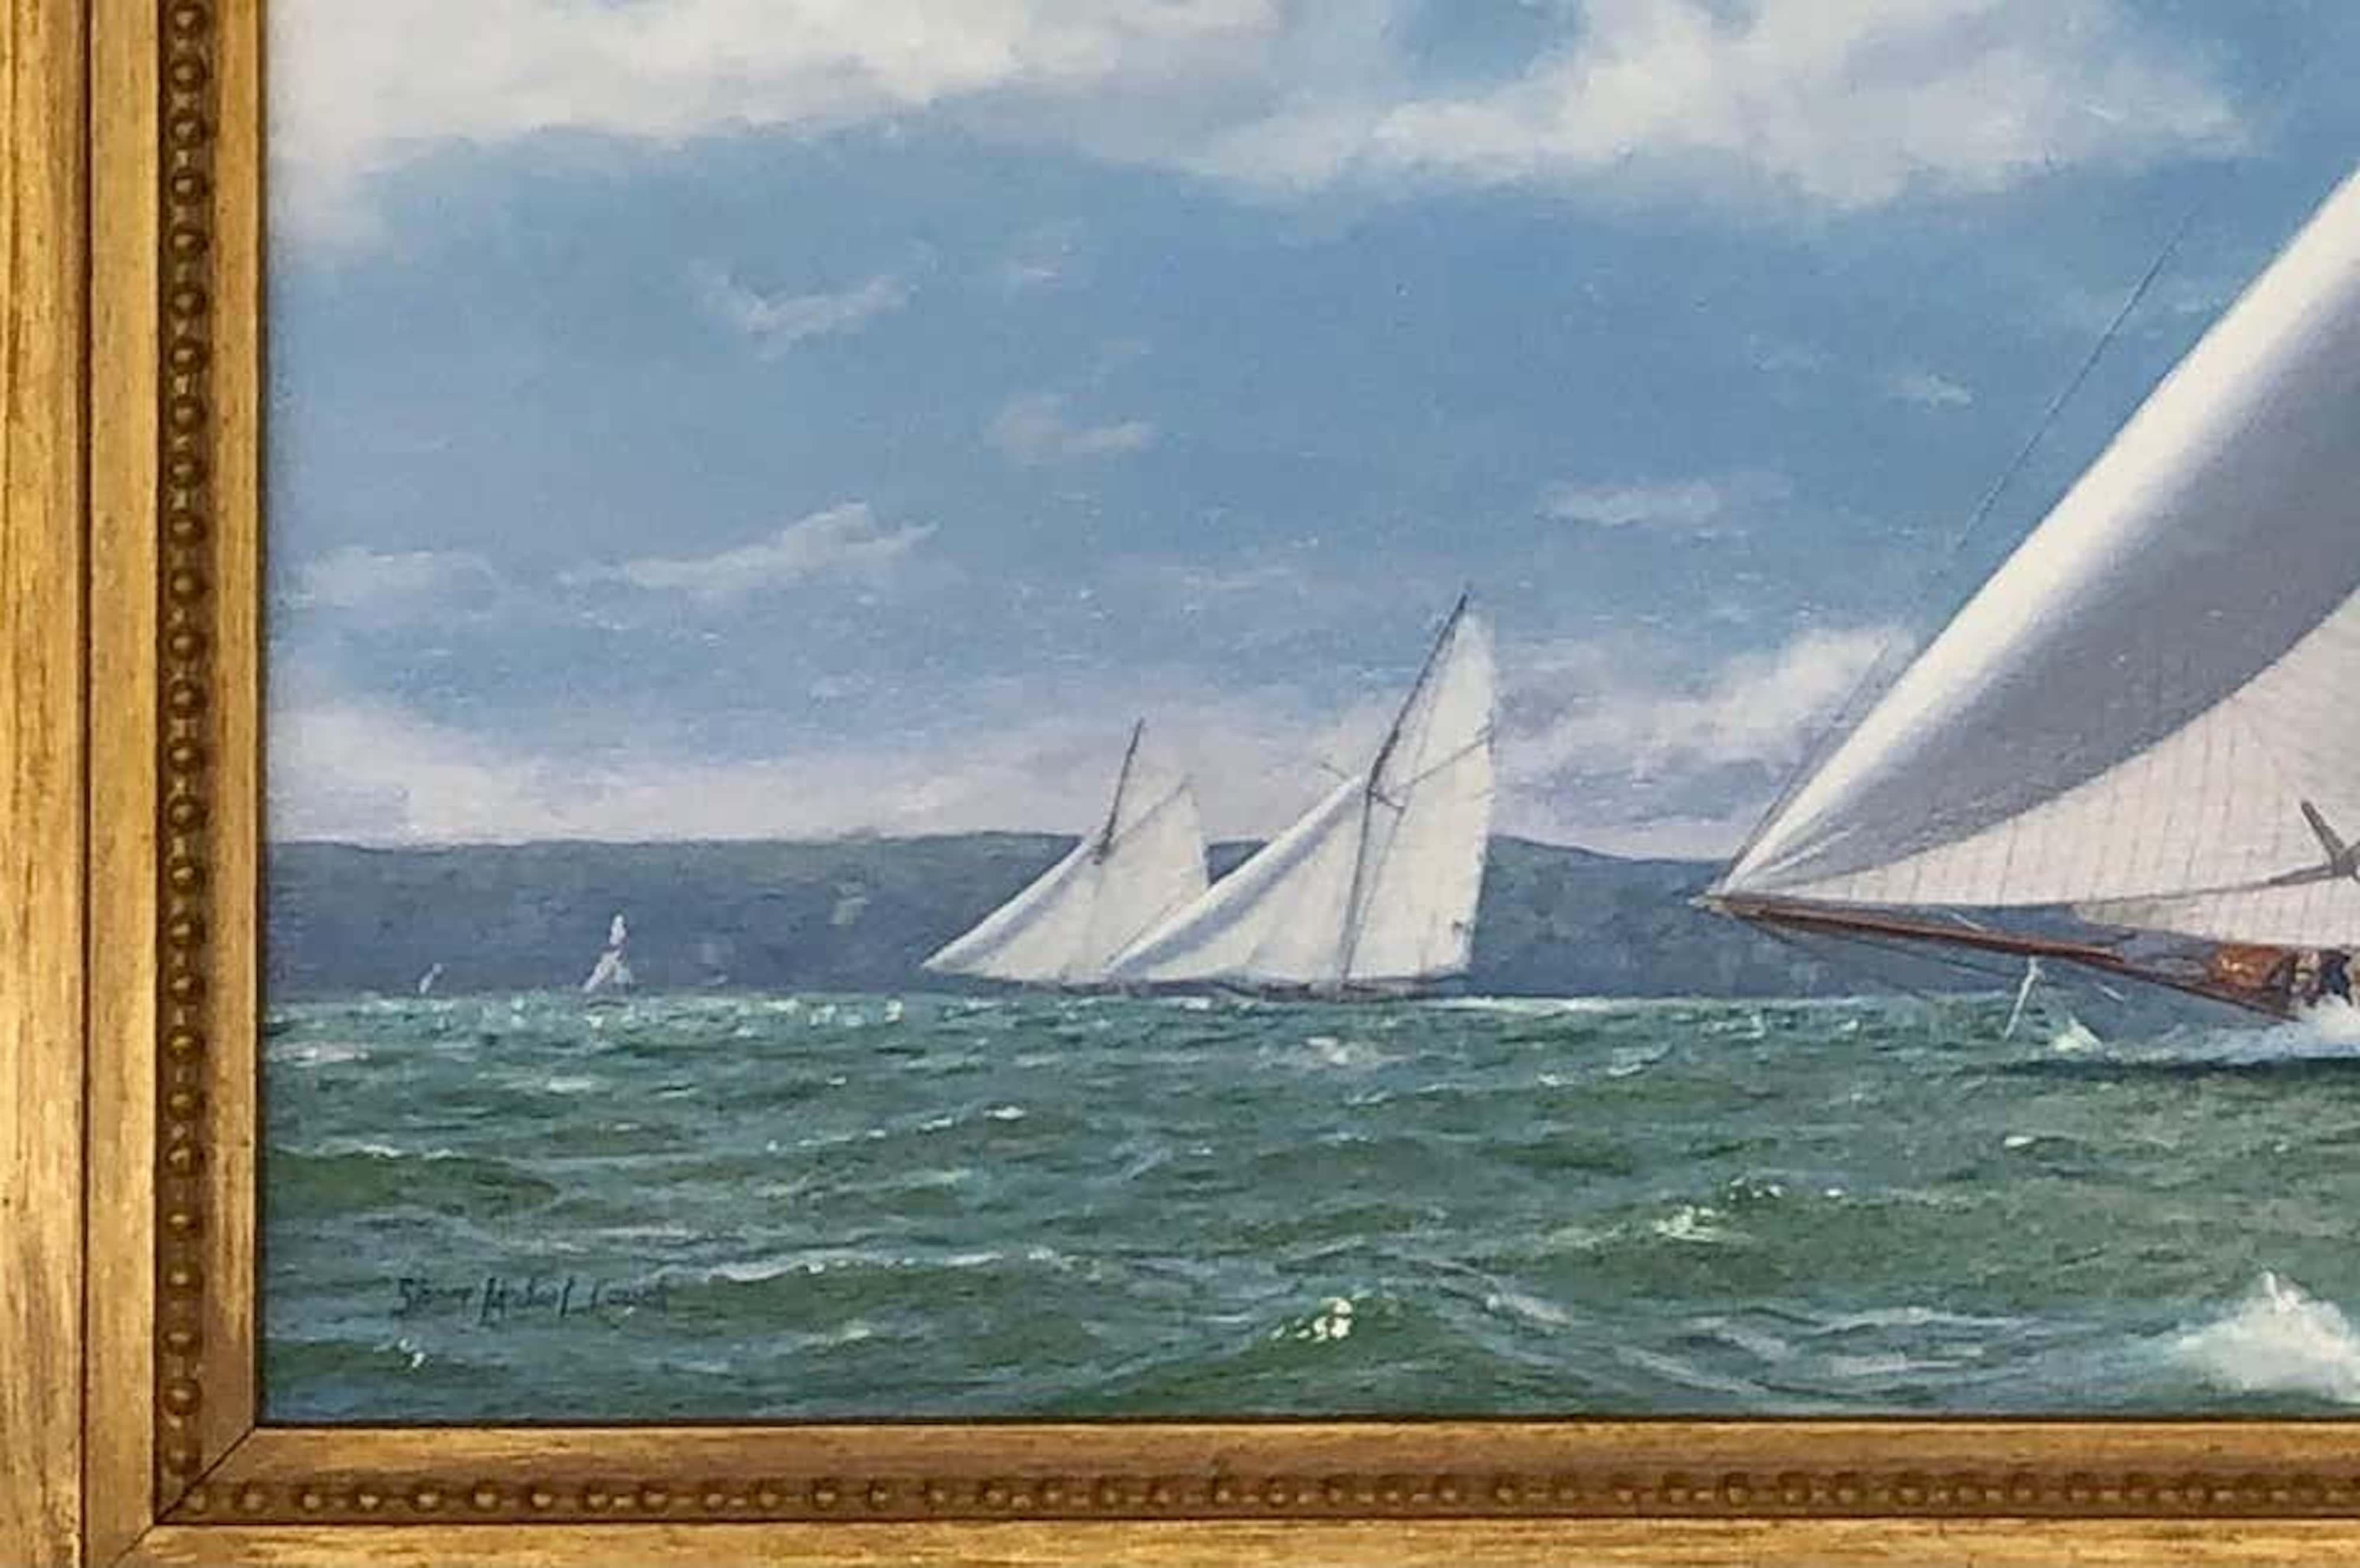 New York Yacht Club Race, 1893 - Painting by Shane Michael Couch